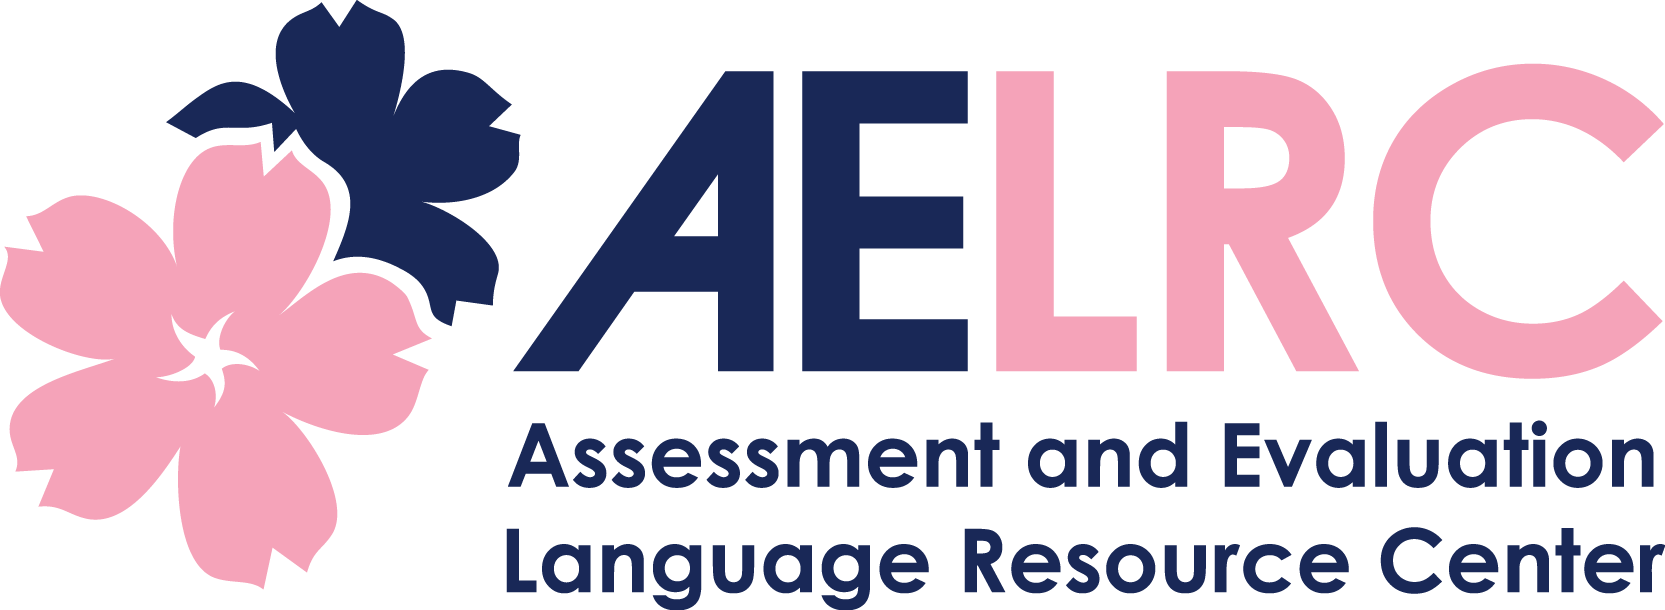 Assessment and Evaluation Language Resource Center
Georgetown University logo